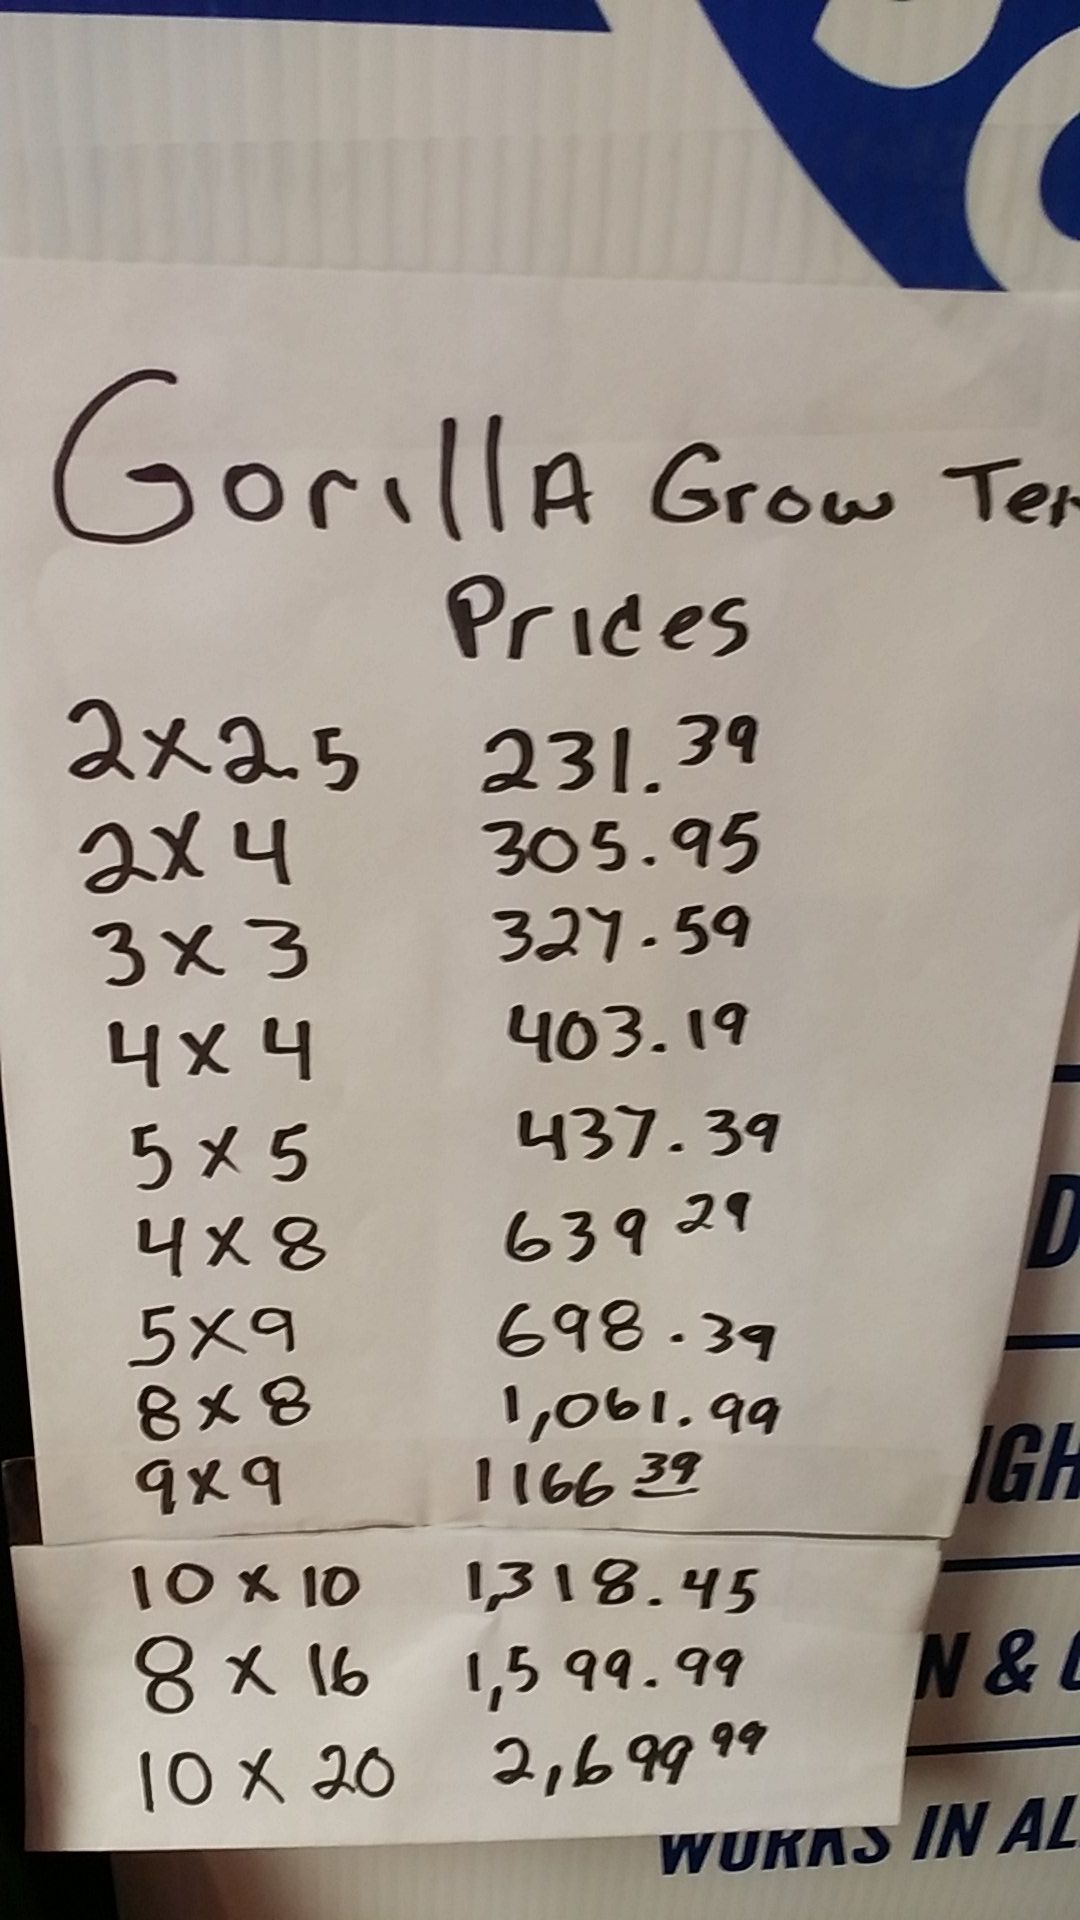 Gorilla grow tents Prices, sale 10% off this week -Text me if you don't understand the price sheet in the picture posted